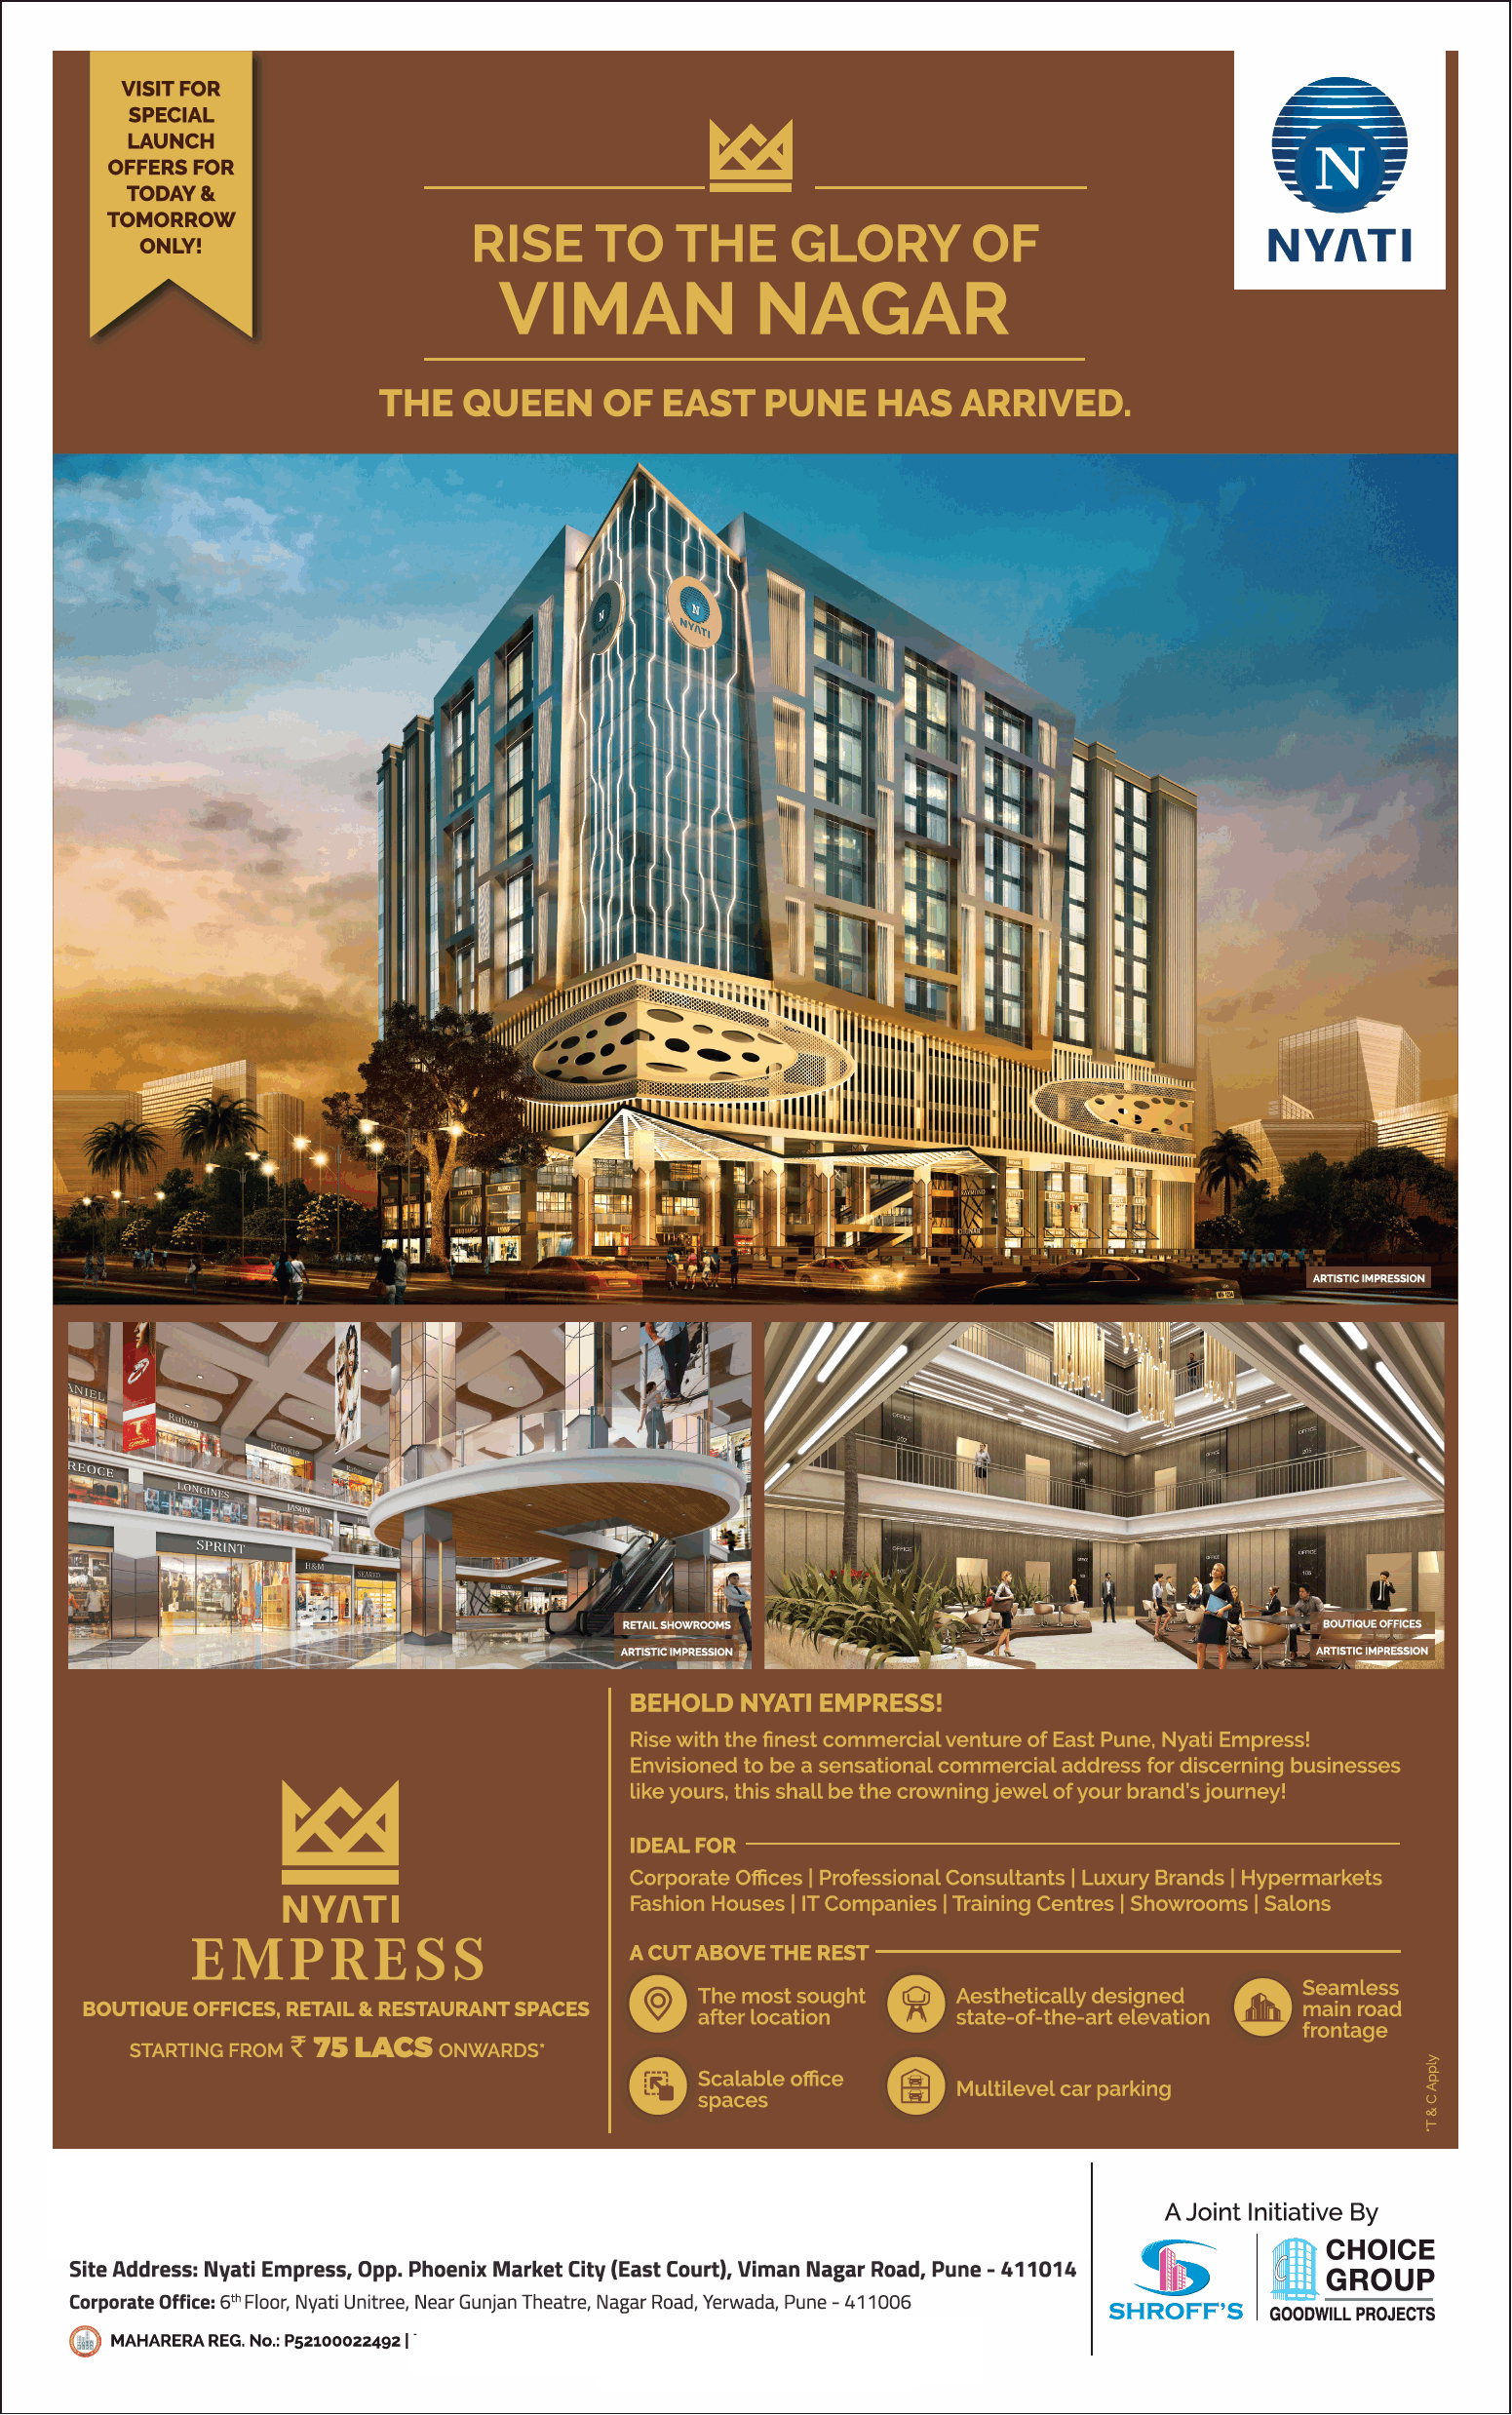 Boutique offices, retail and restaurants spaces starting from Rs 75 lakh onwards at Nyati Empress, Pune